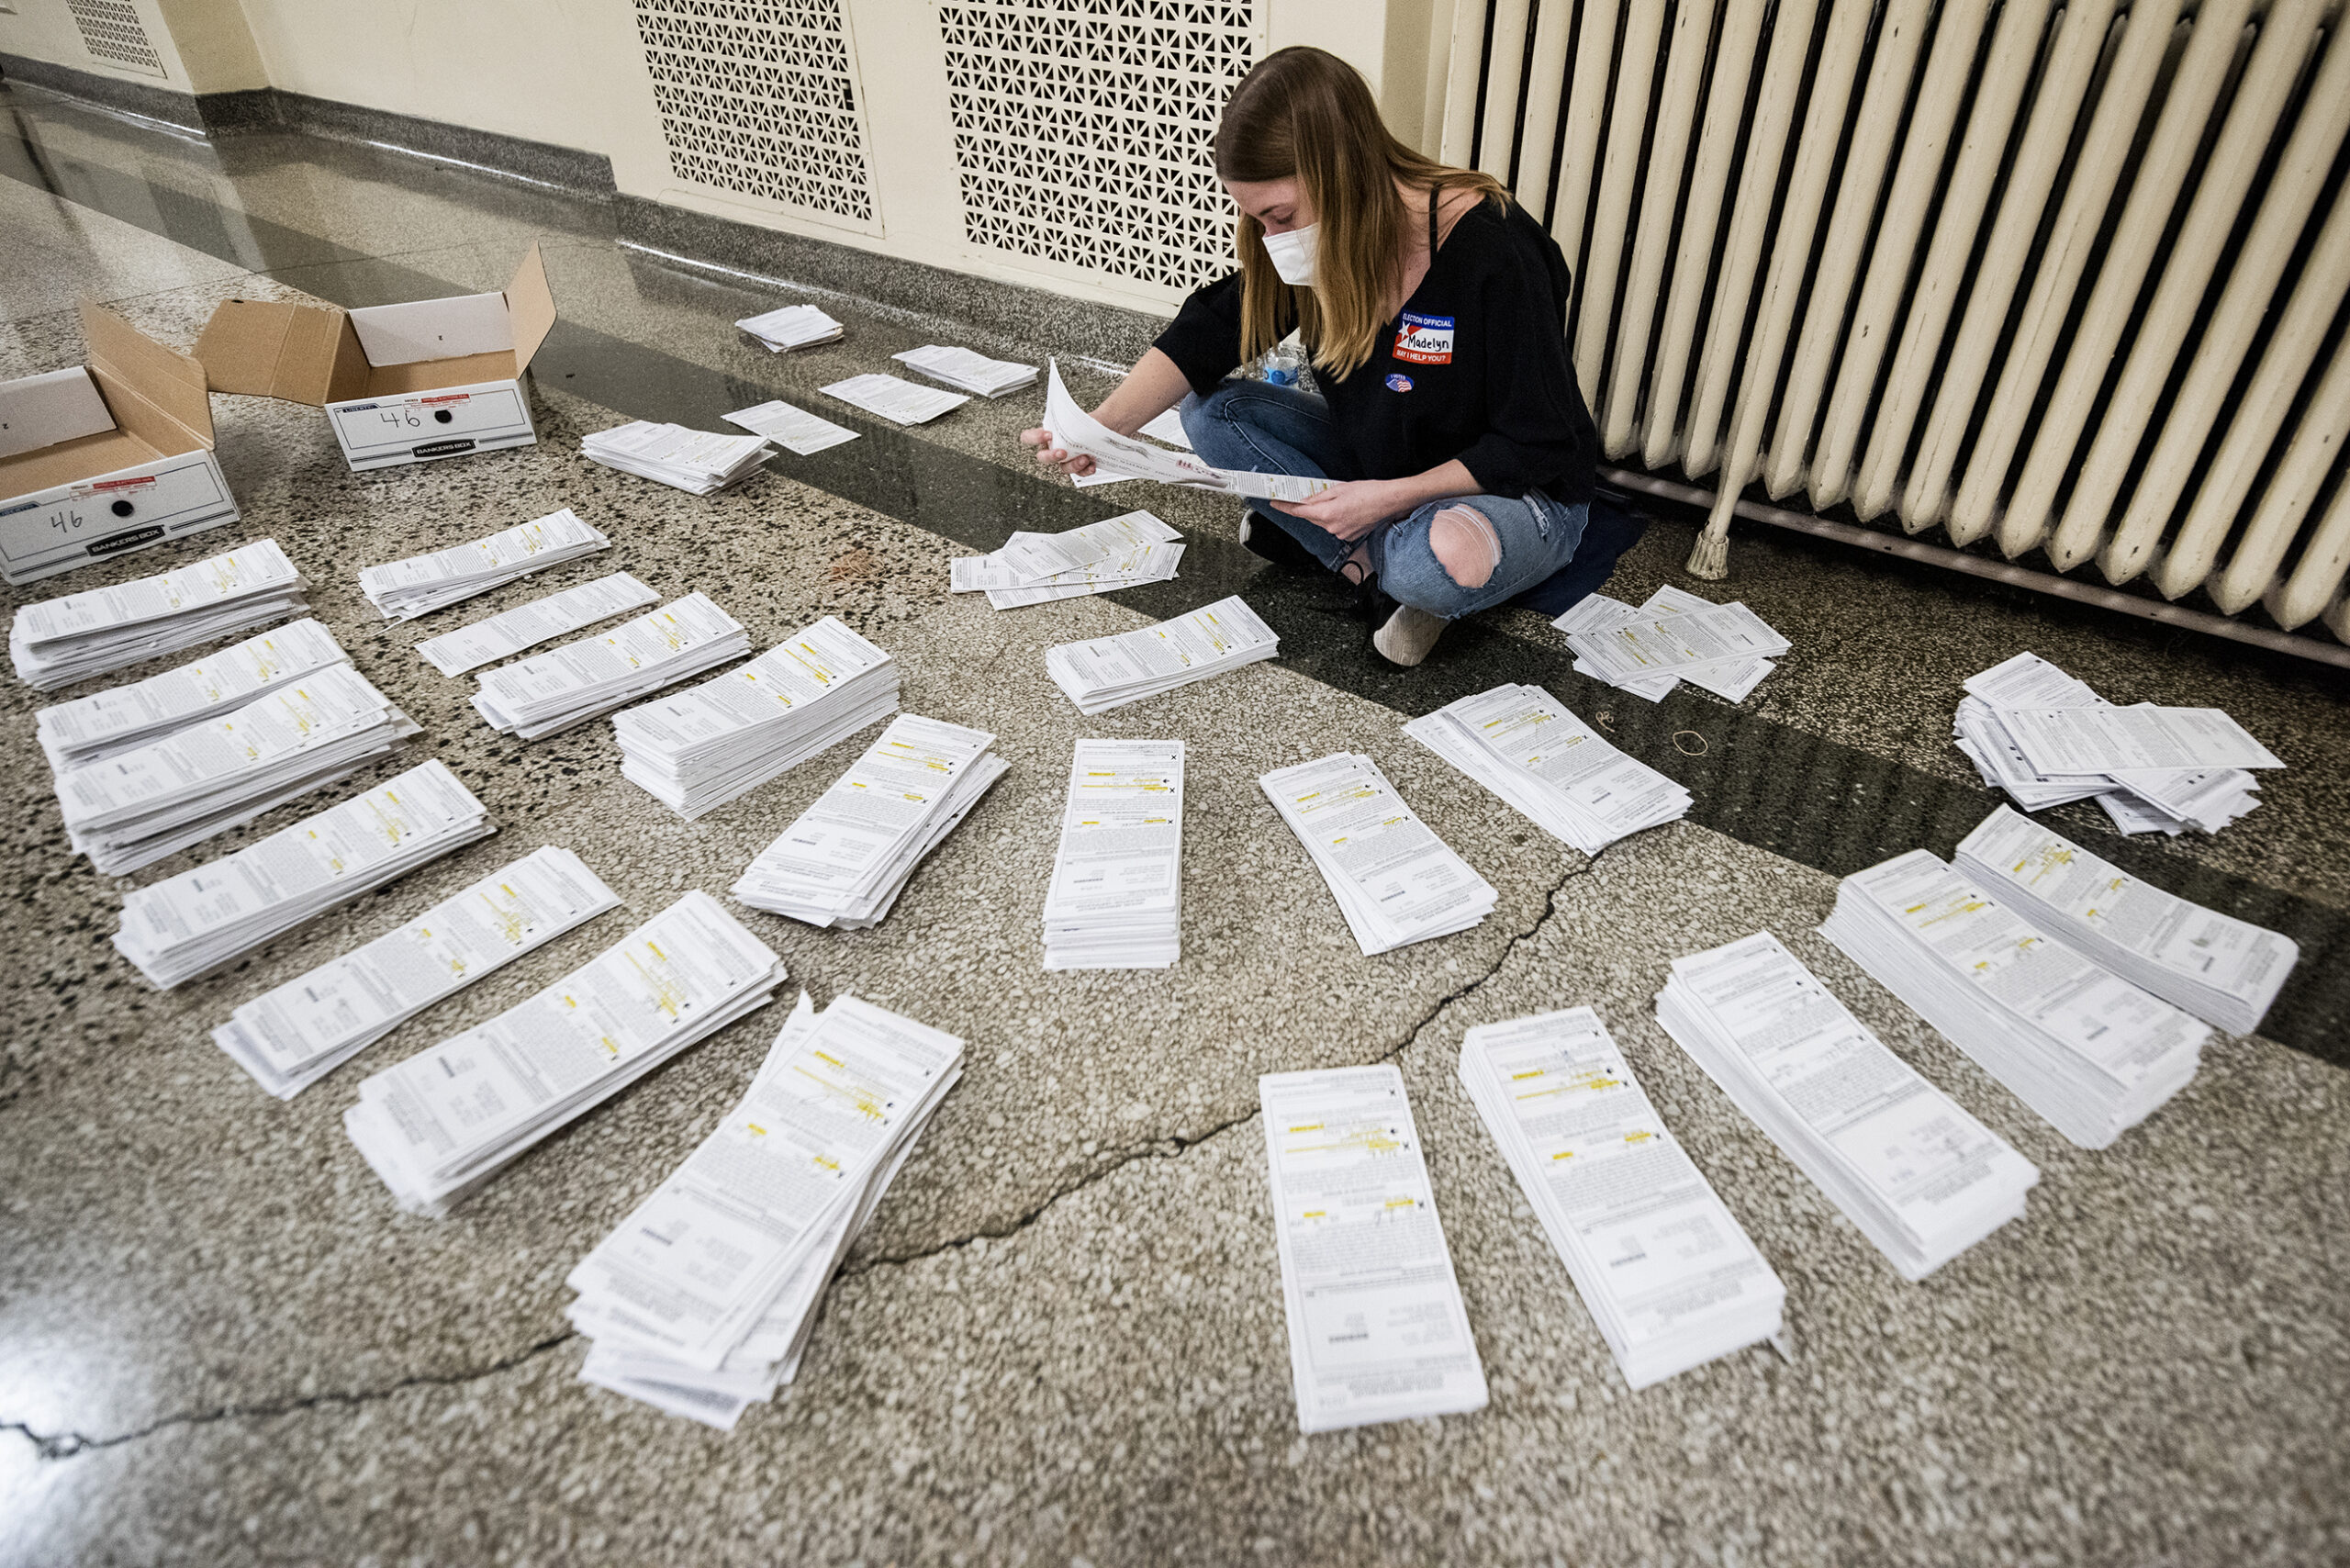 ballot envelopes surround a worker who sits on the floor